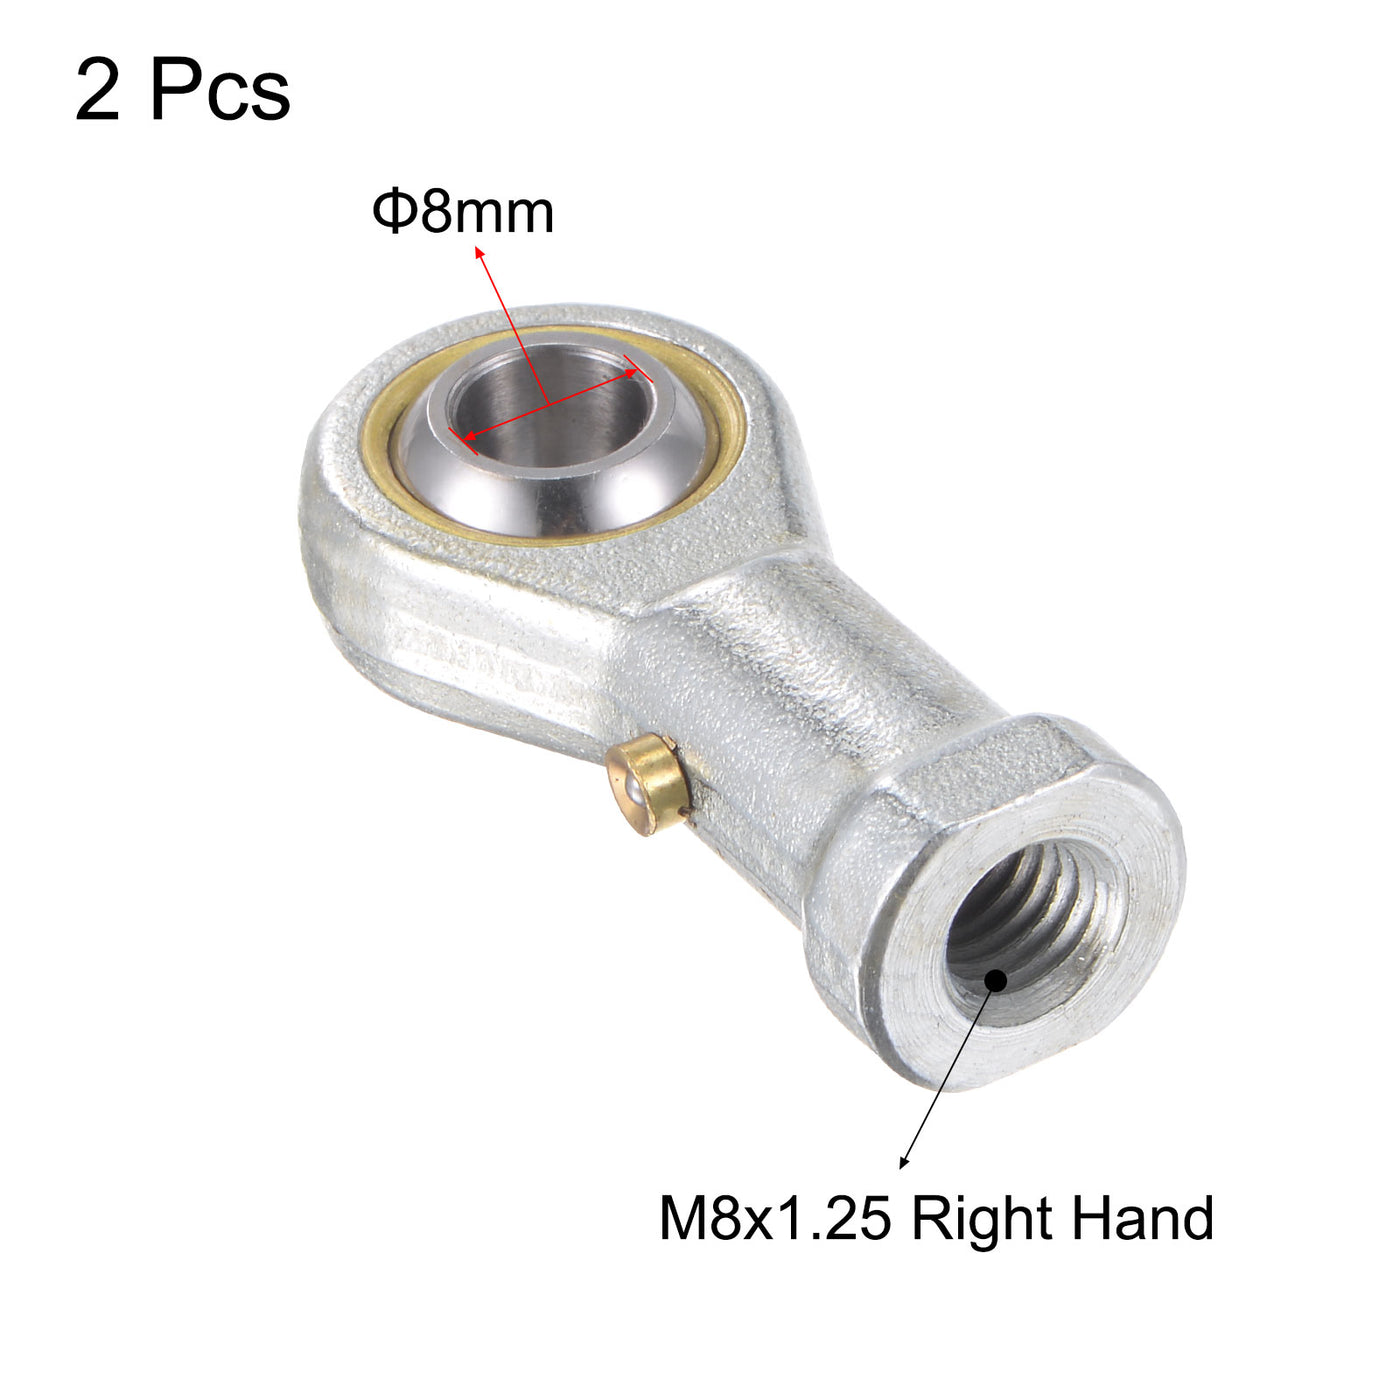 uxcell Uxcell 2pcs PHS8 Rod End Bearing 8mm Bore Self-lubricated M8 Right Hand Female Thread